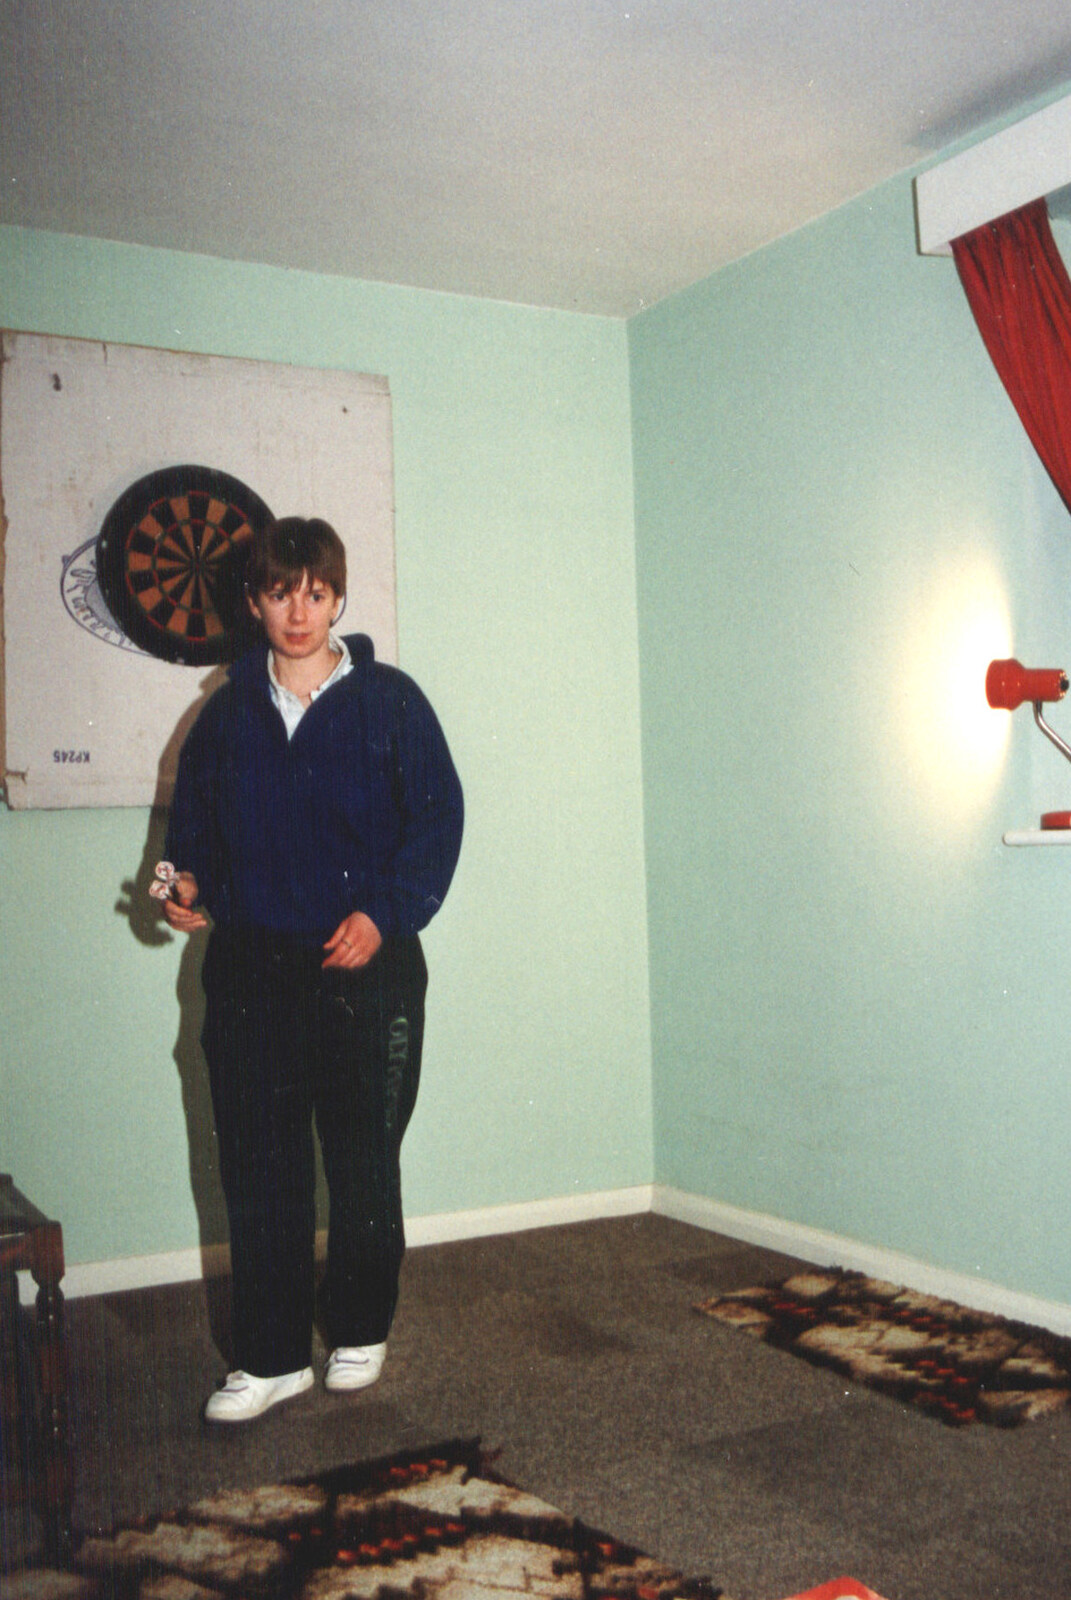 Sarah plays darts from An "Above The Laundrette" Barbeque, Diss, Norfolk - 28th May 1990